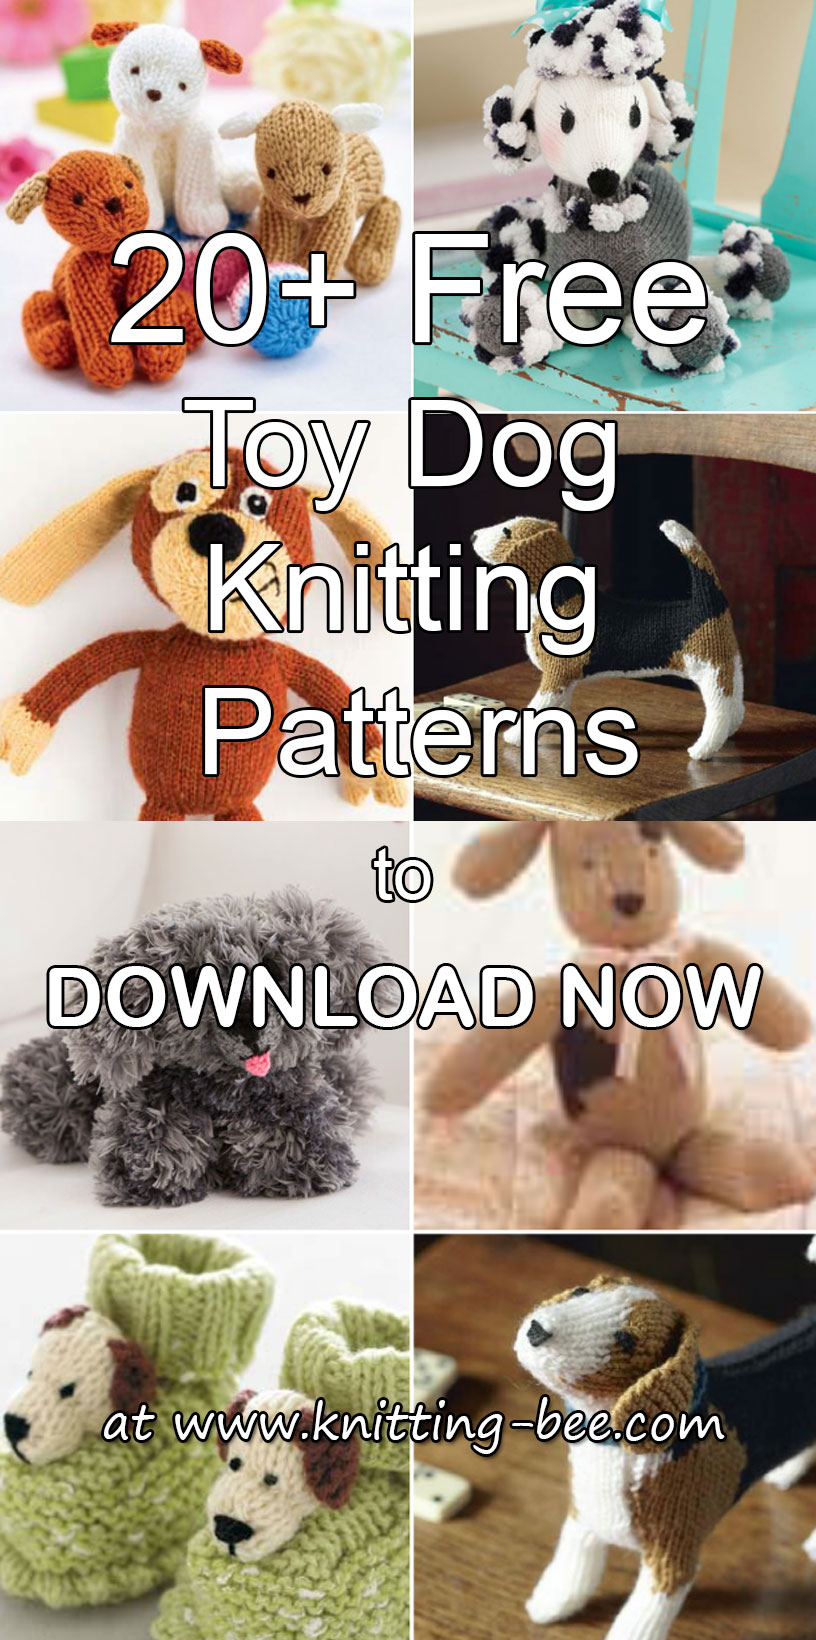 20 Free Toy Dog Knitting Patterns To Download Now